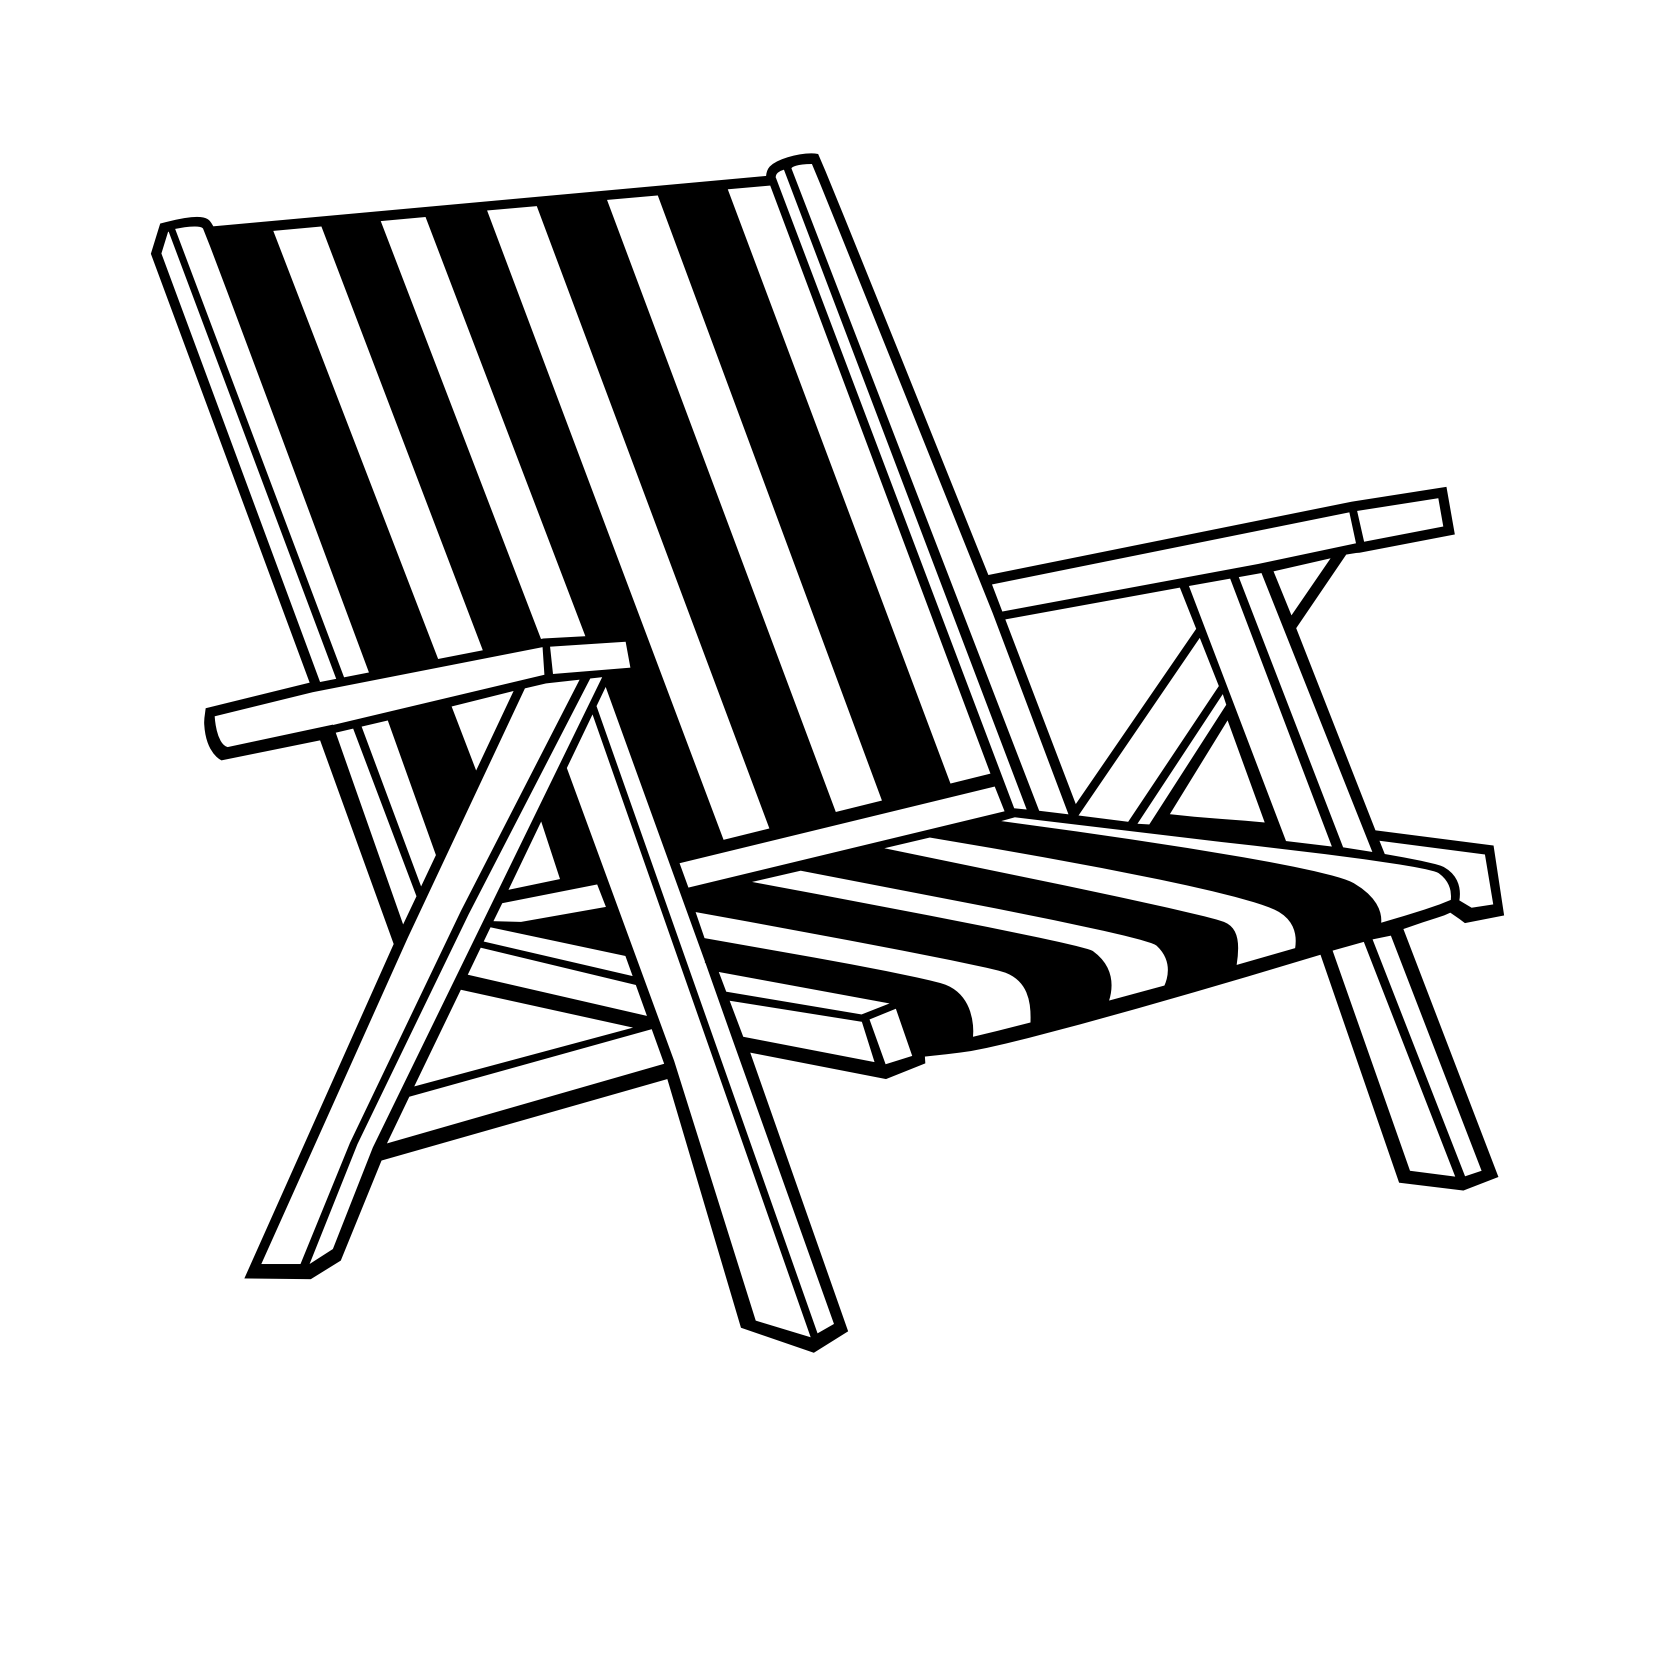 coloring-pages-chair-949 | Lawn chairs, Beach chairs, Chair